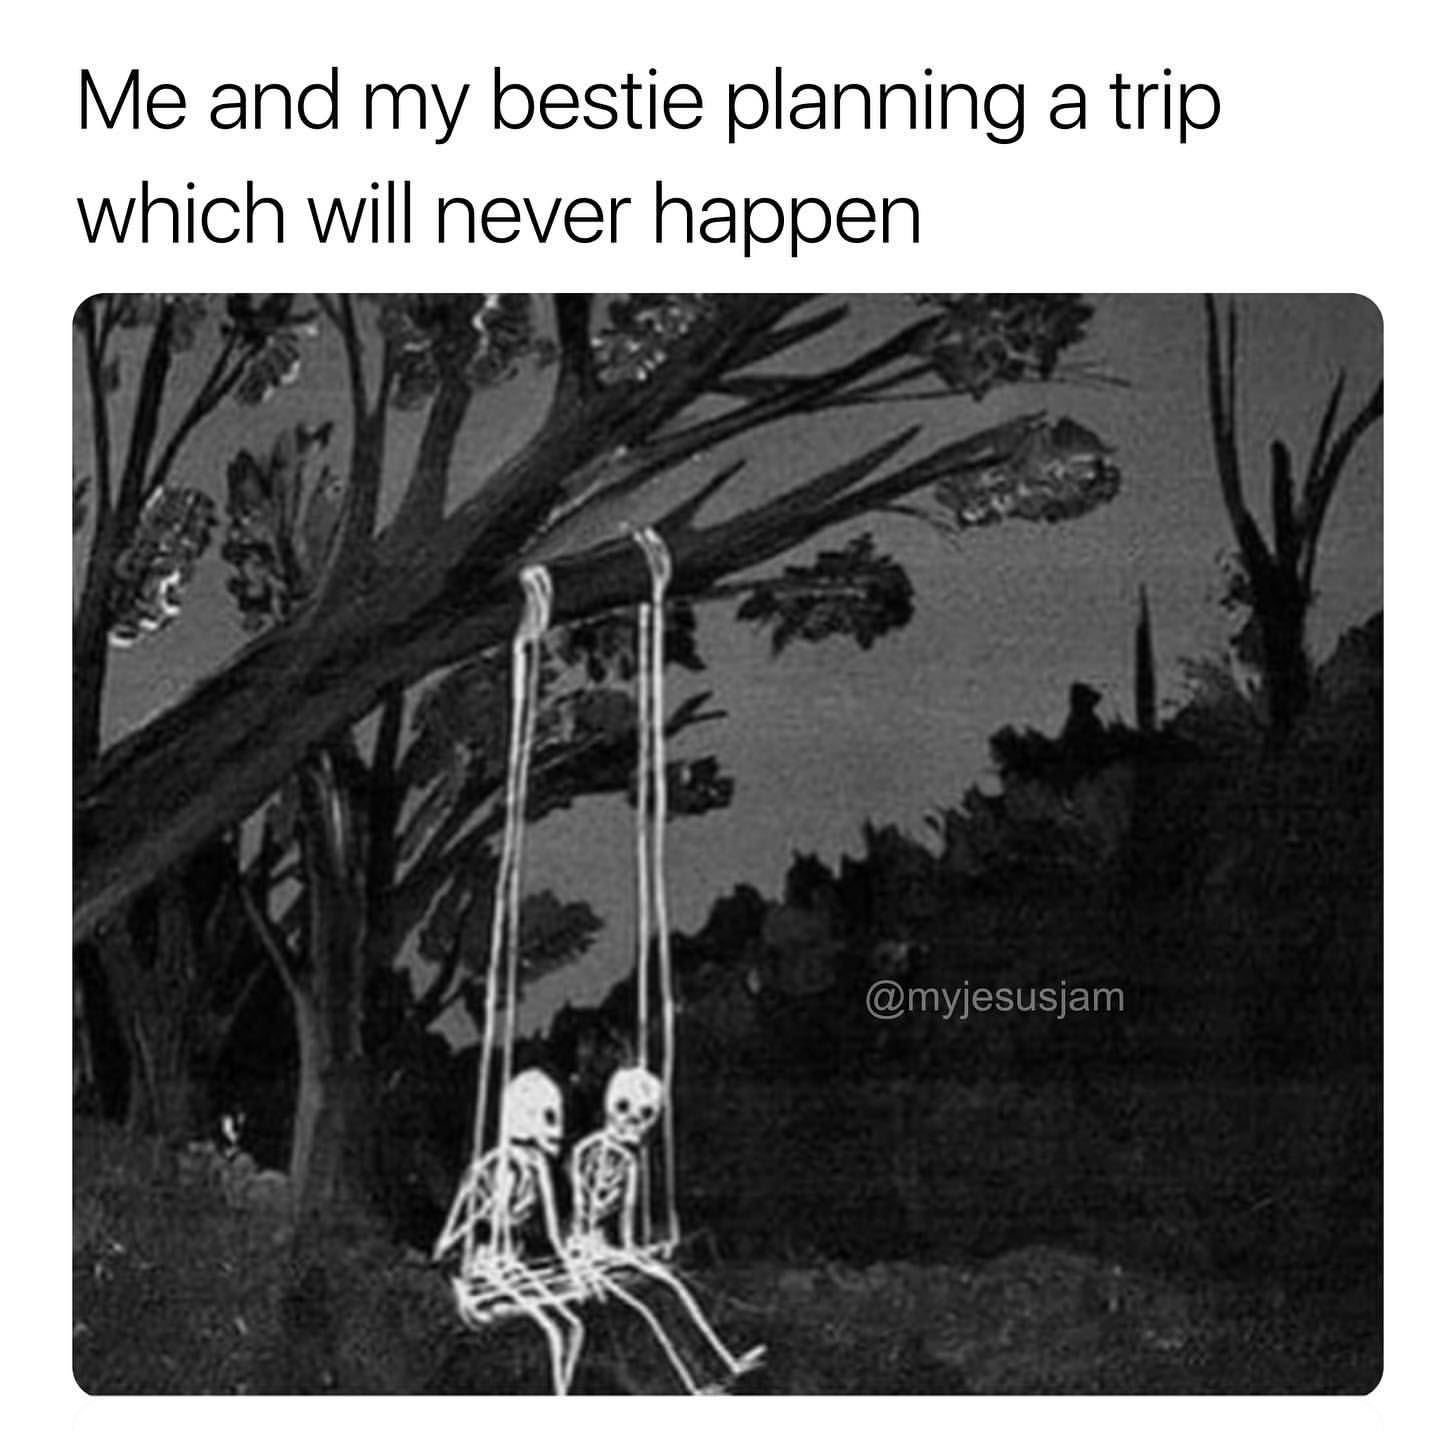 Me and my bestie planning a trip which will never happen.